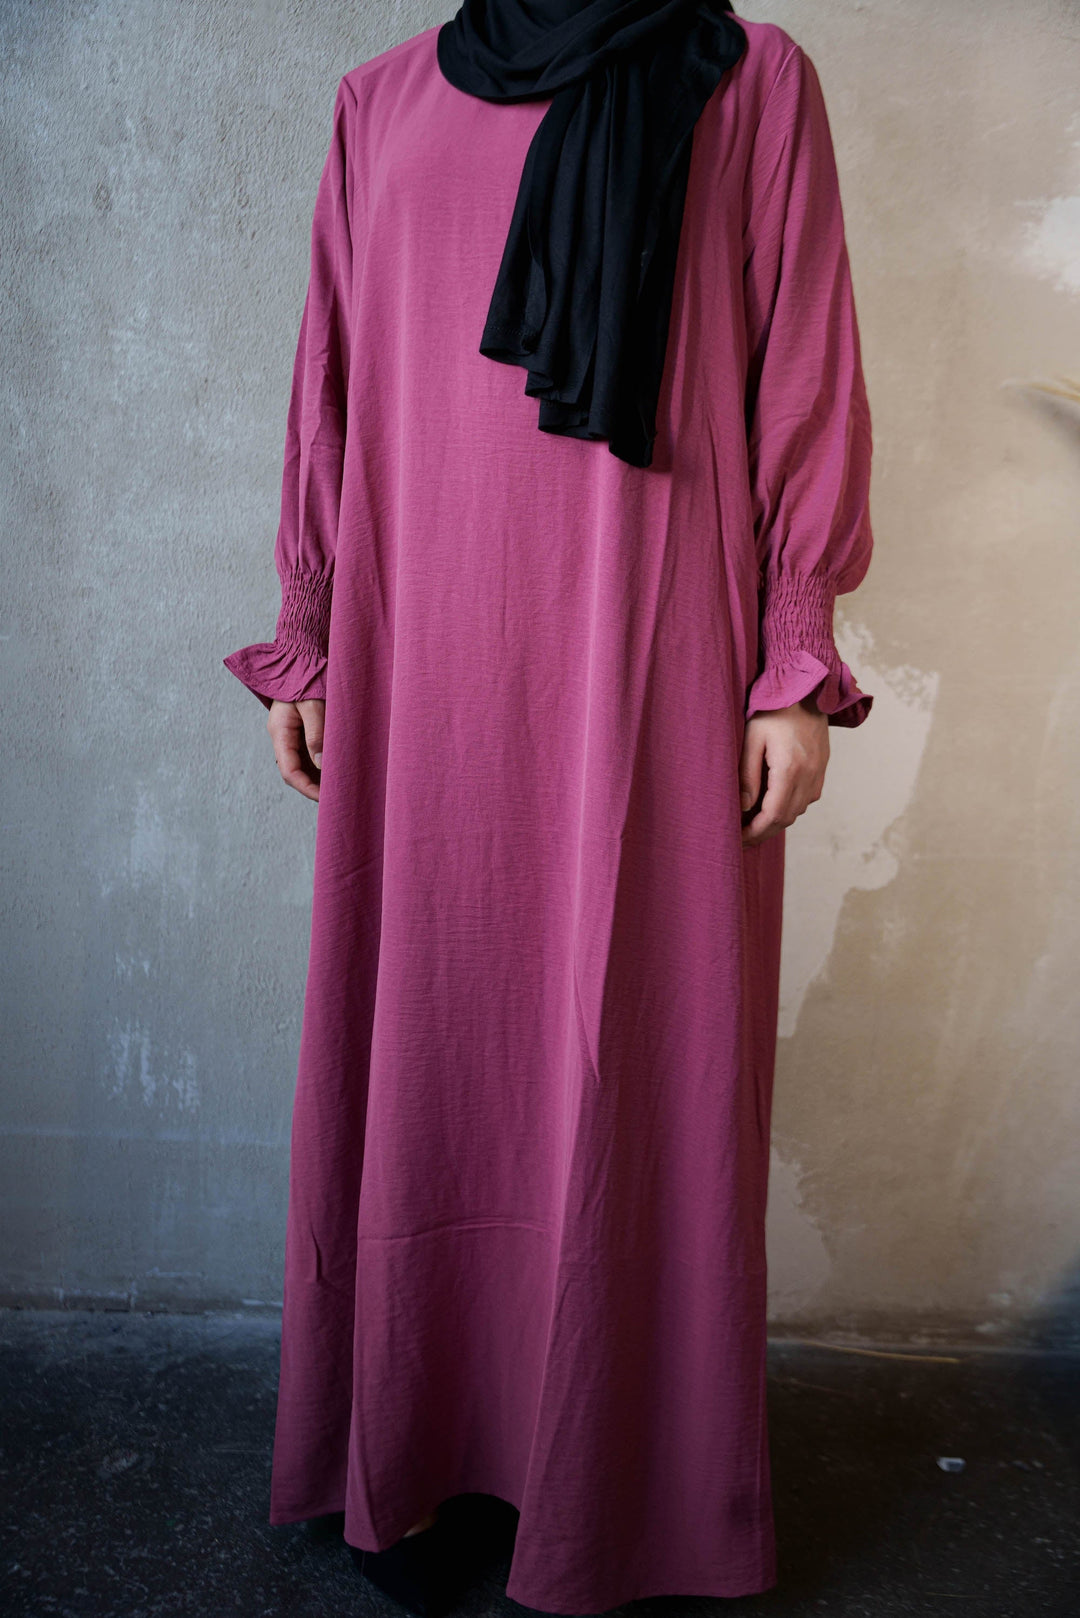 a woman wearing a pink dress and a black scarf